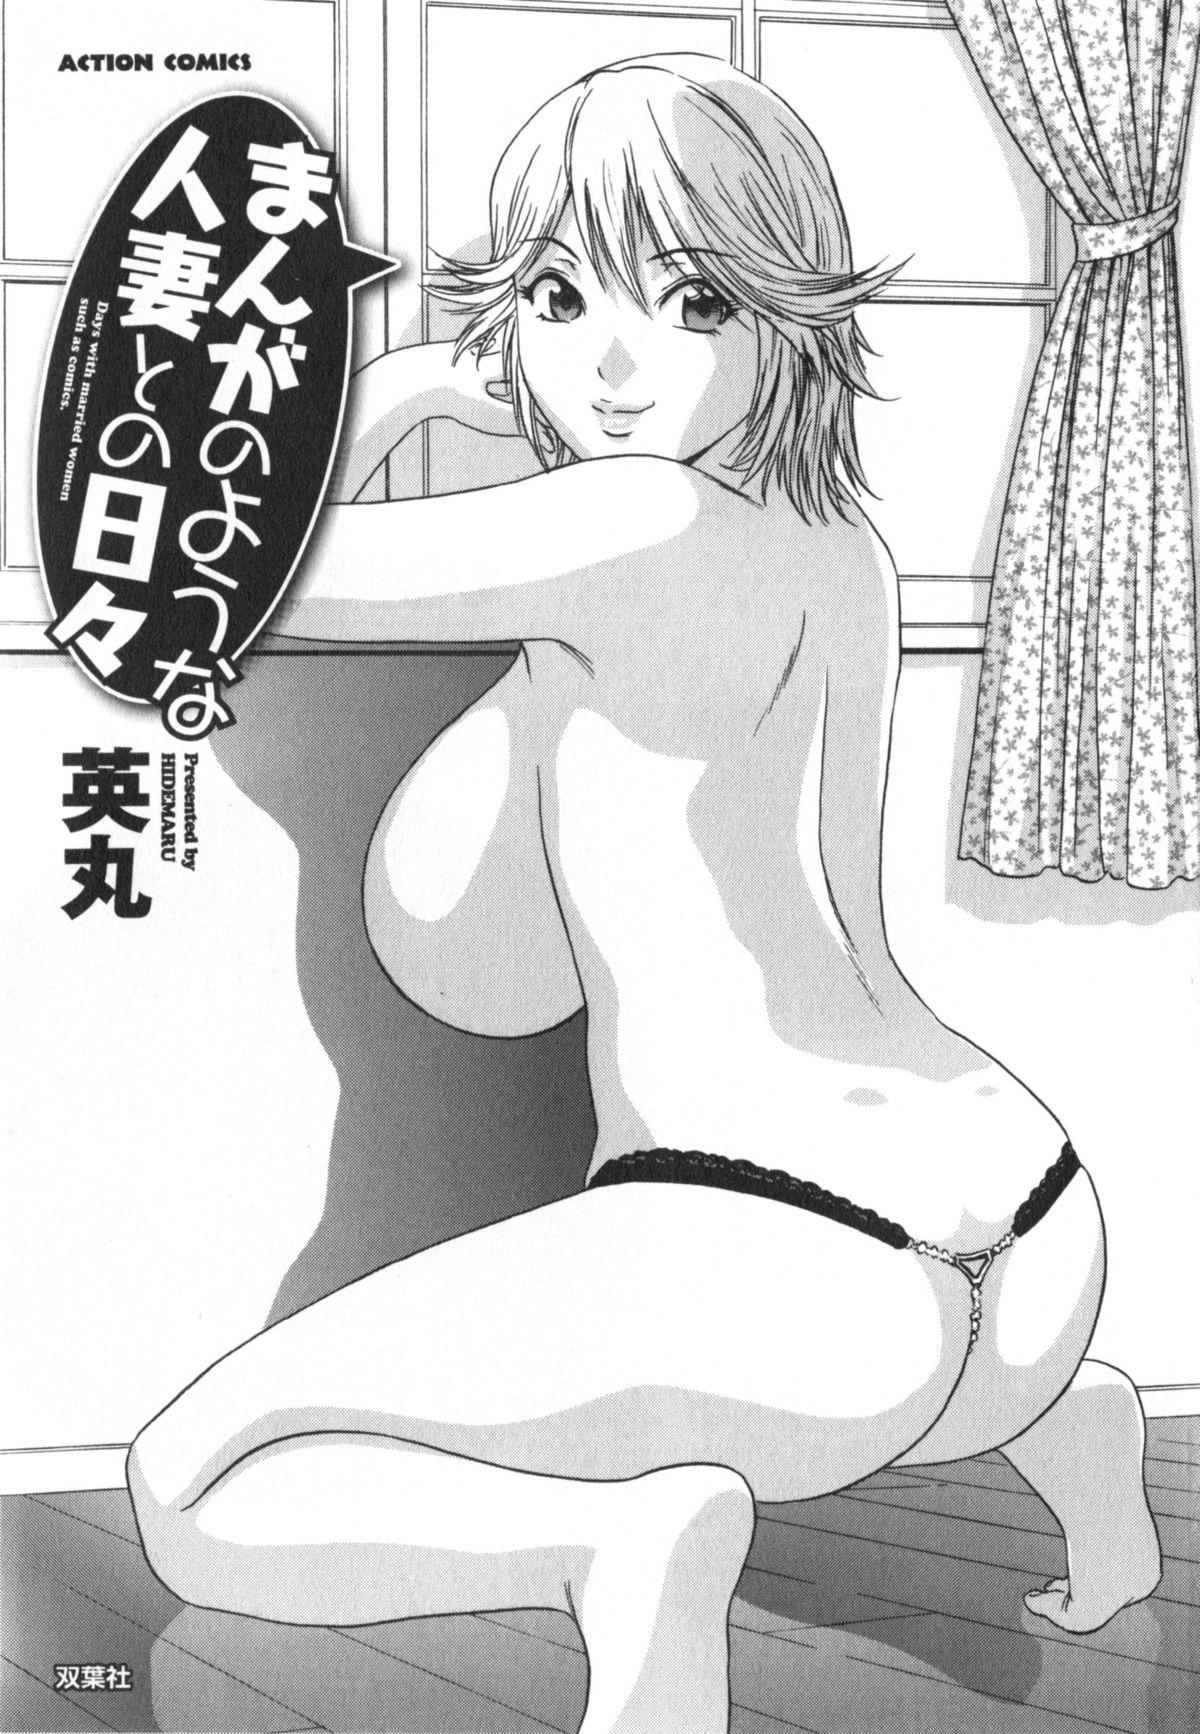 Gaycum [Hidemaru] Life with Married Women Just Like a Manga 1 - Ch. 1-8 [English] {Tadanohito} Muscles - Page 4